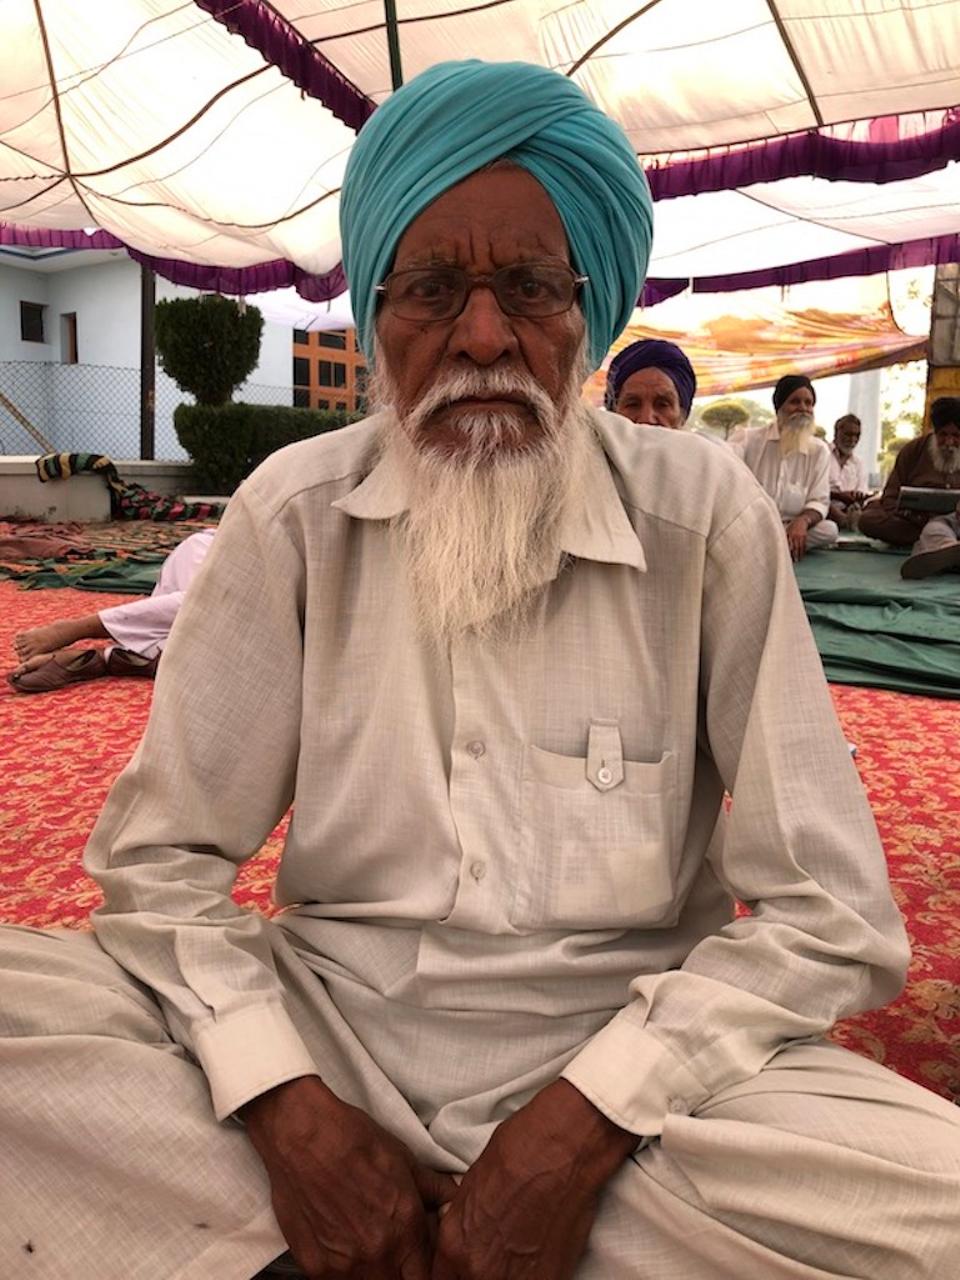 Chamkore Singh's son Sukhpal committed suicide because of a heavy debt he was unable to pay. (Shams Irfan)